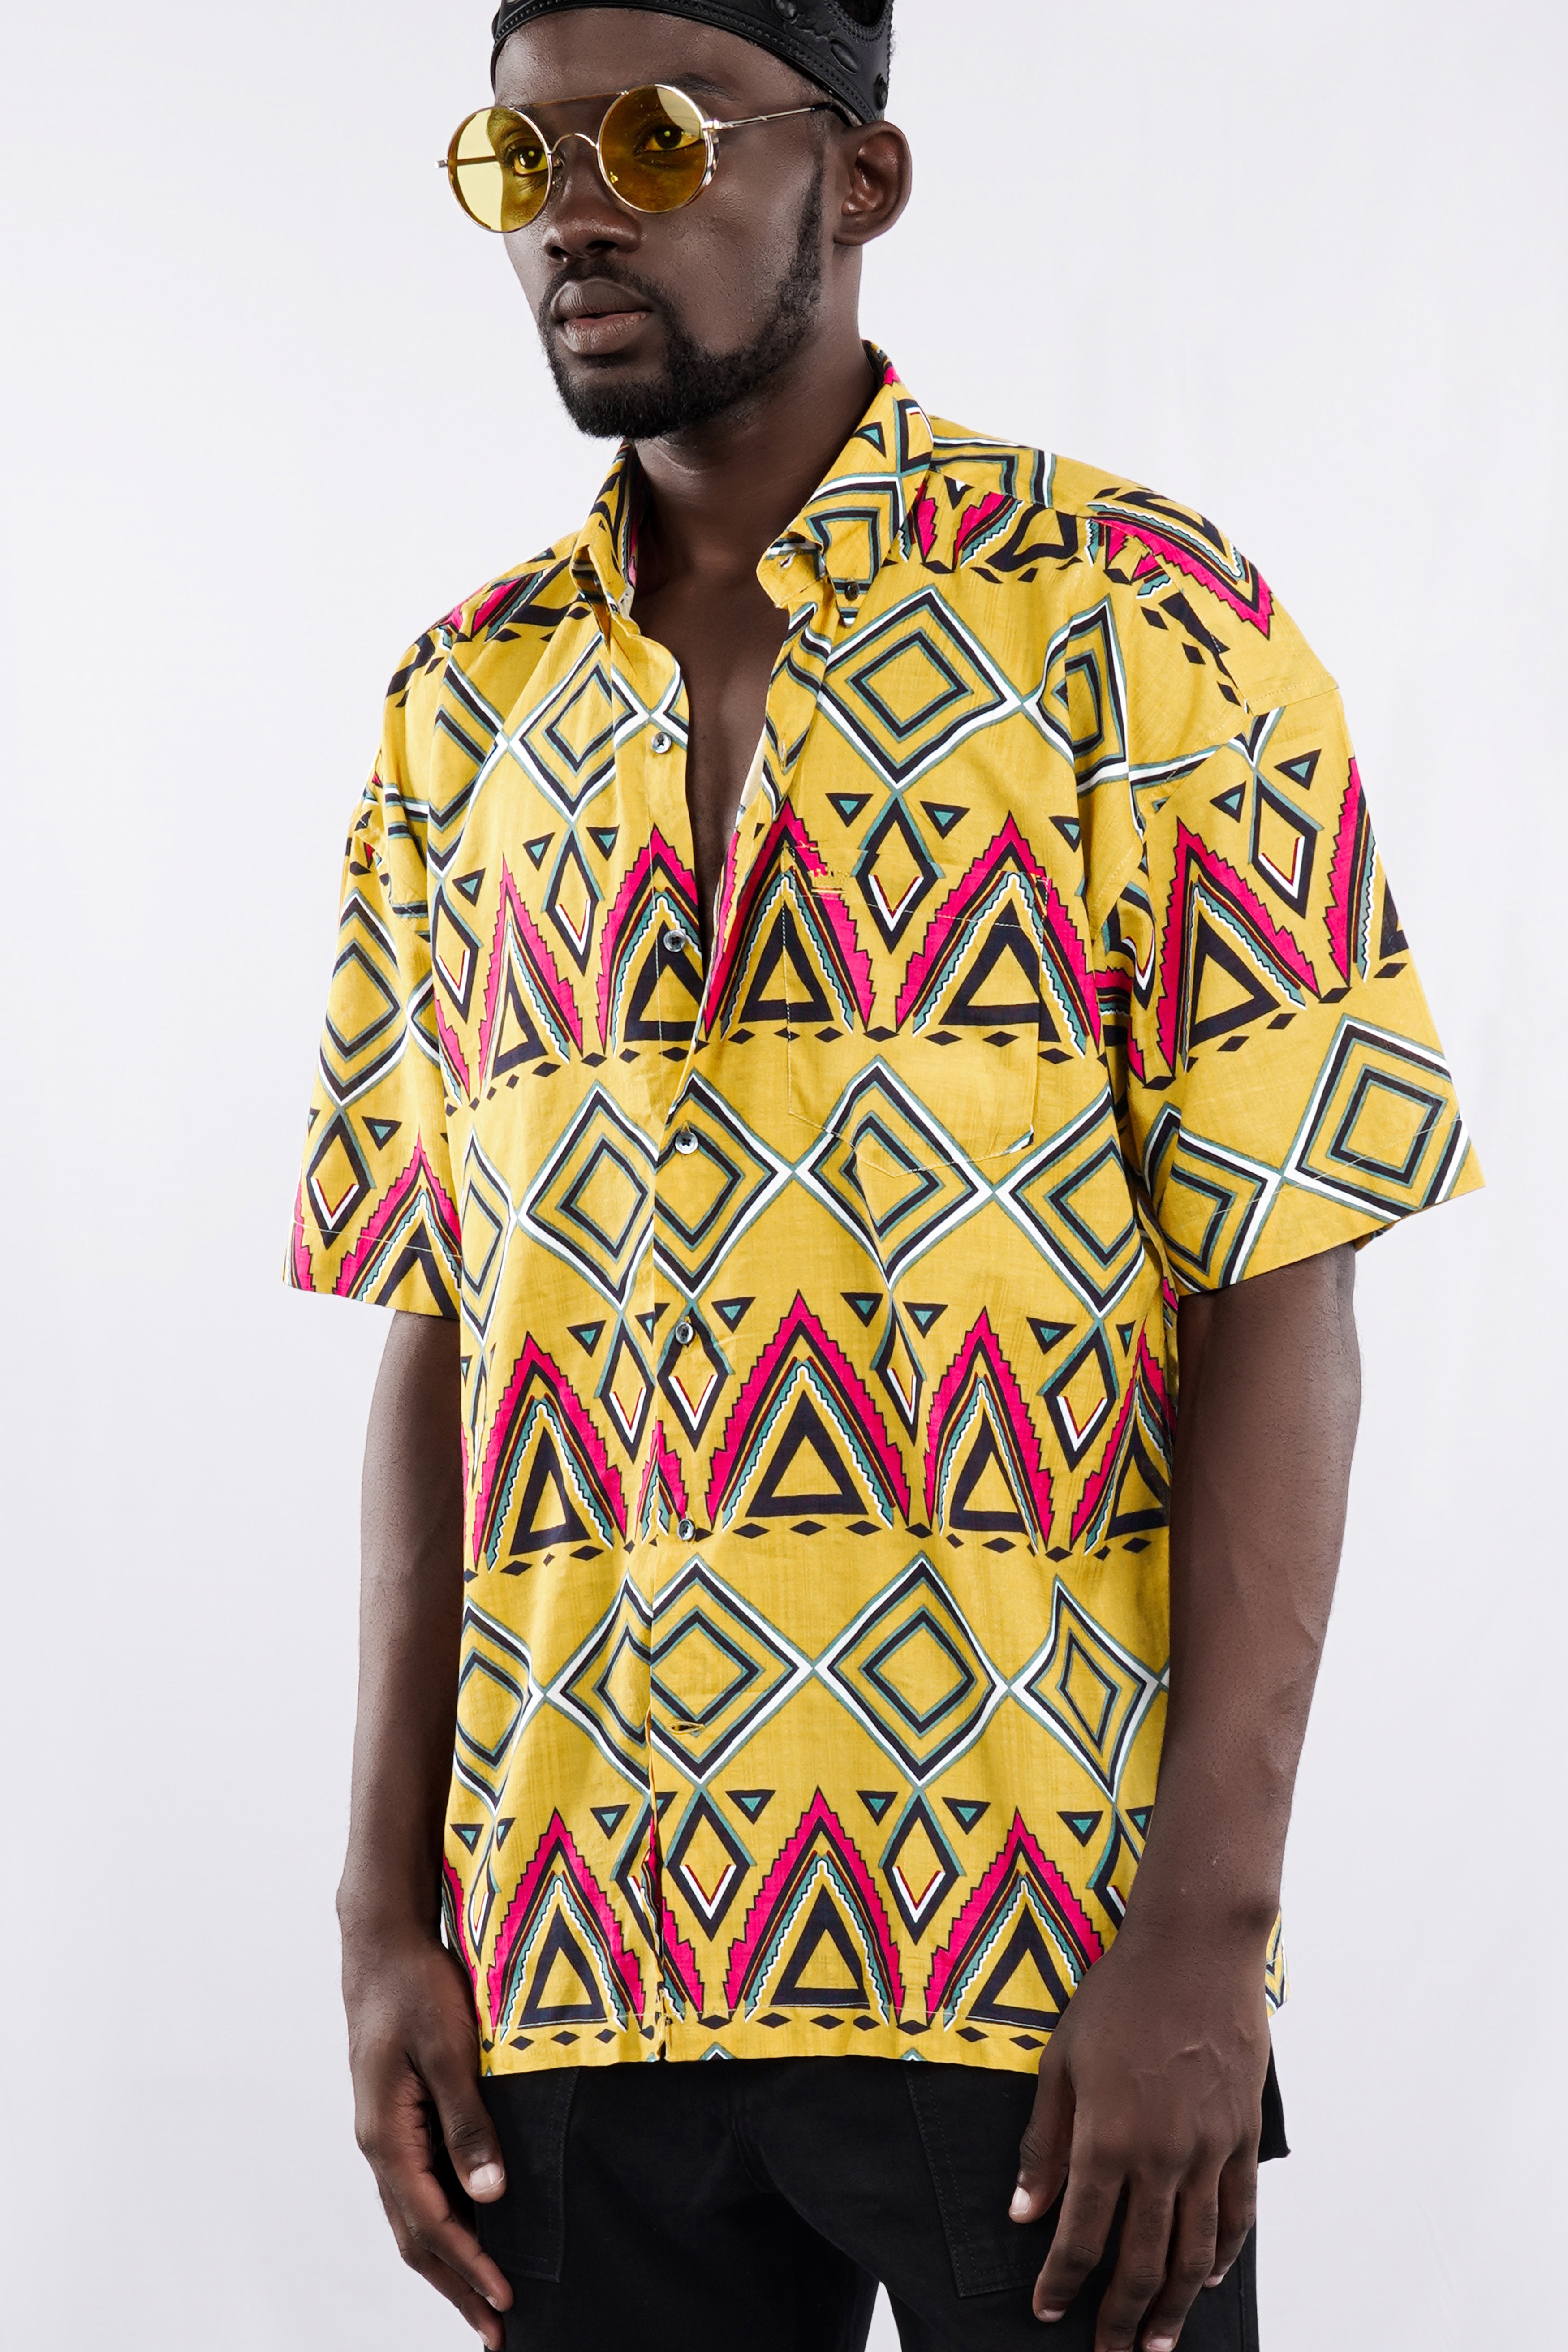 Harvest Yellow with Raspberry Pink Funky Printed Lightweight Oversized Premium Cotton Shirt